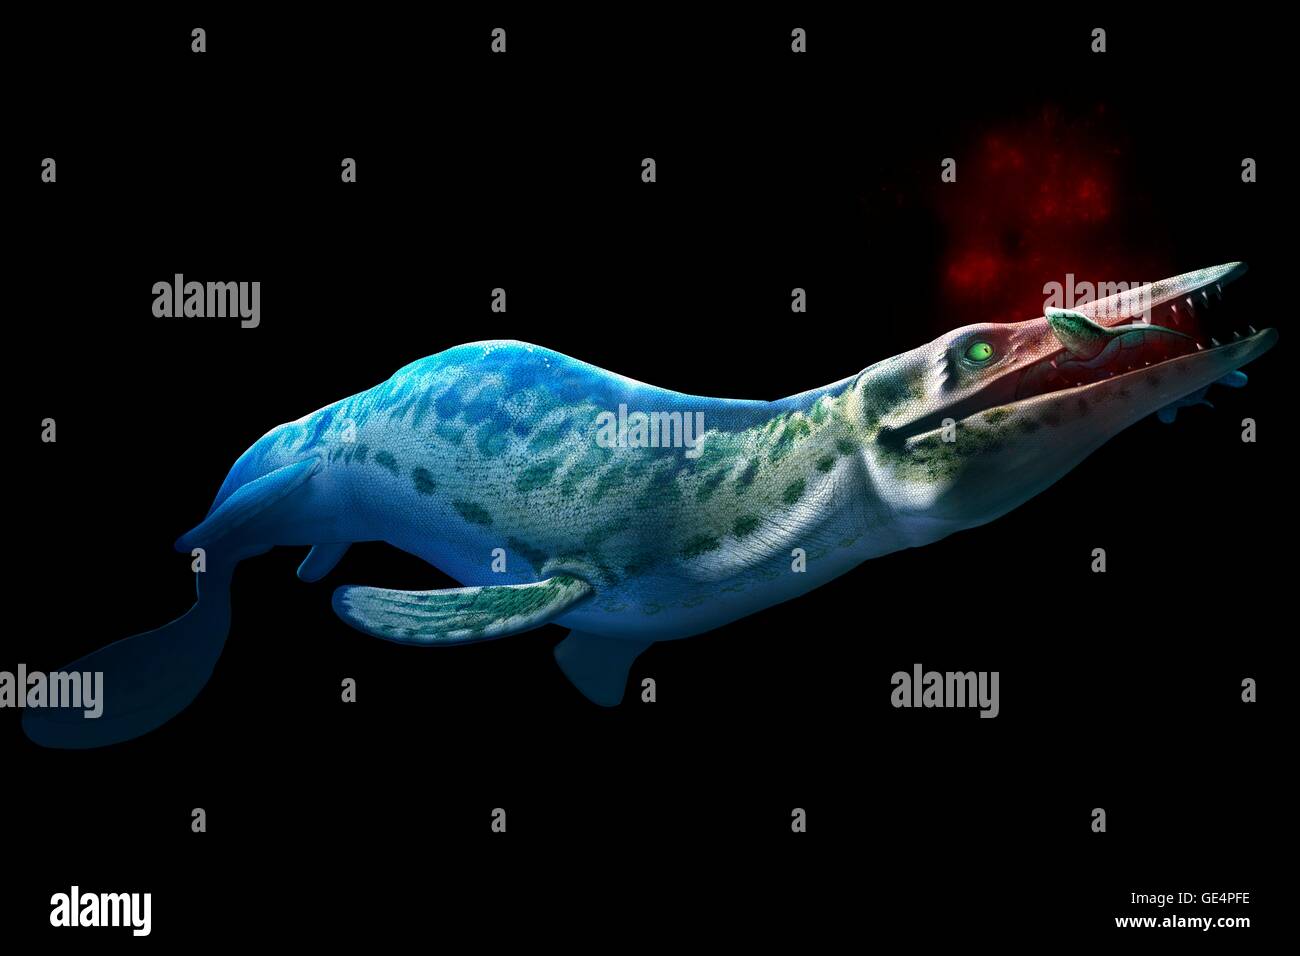 The mosasaur is an extinct marine reptile that lived 70-65 million years ago. It had a long, barrel-shaped body, paddle-like flippers and a large heavy skull. It grew over 15 metres in length and weighed roughly 15 tons. In this image, the creature is seen with some prey, a turtle. Stock Photo